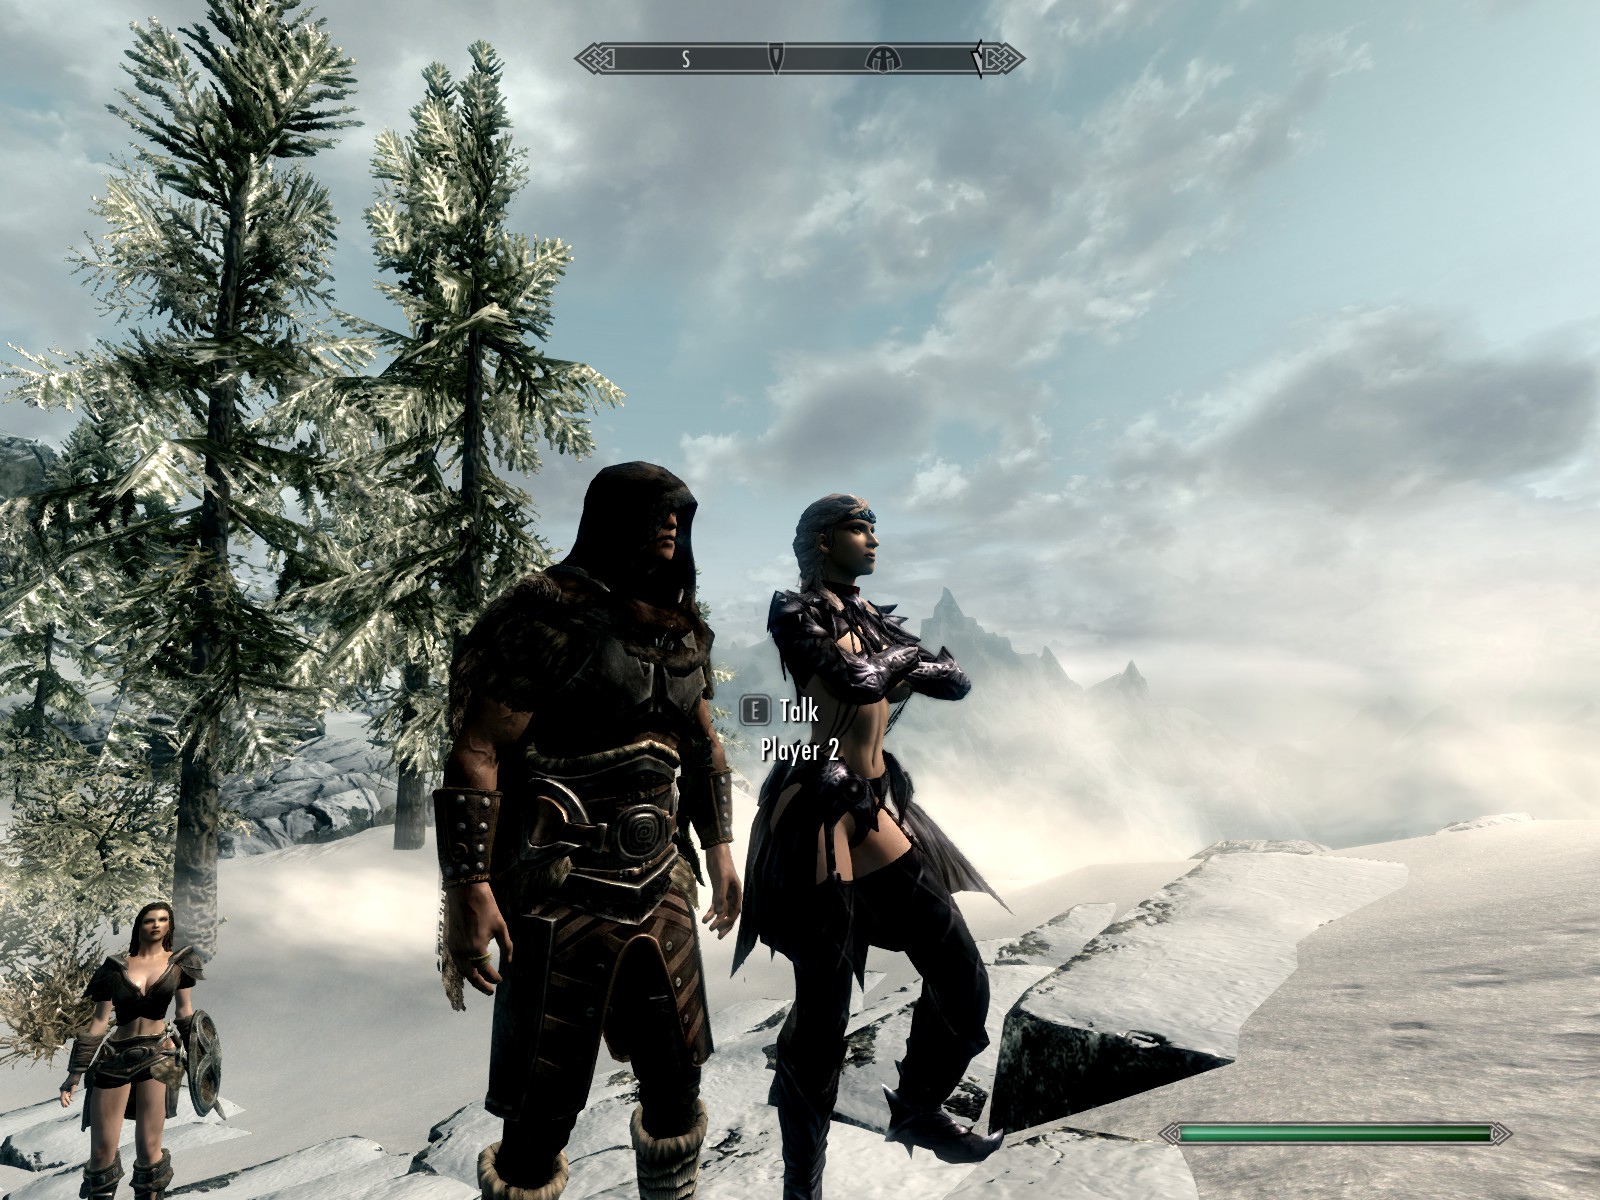 Couch Co-op For Skyrim? There’s a Mod in the Works